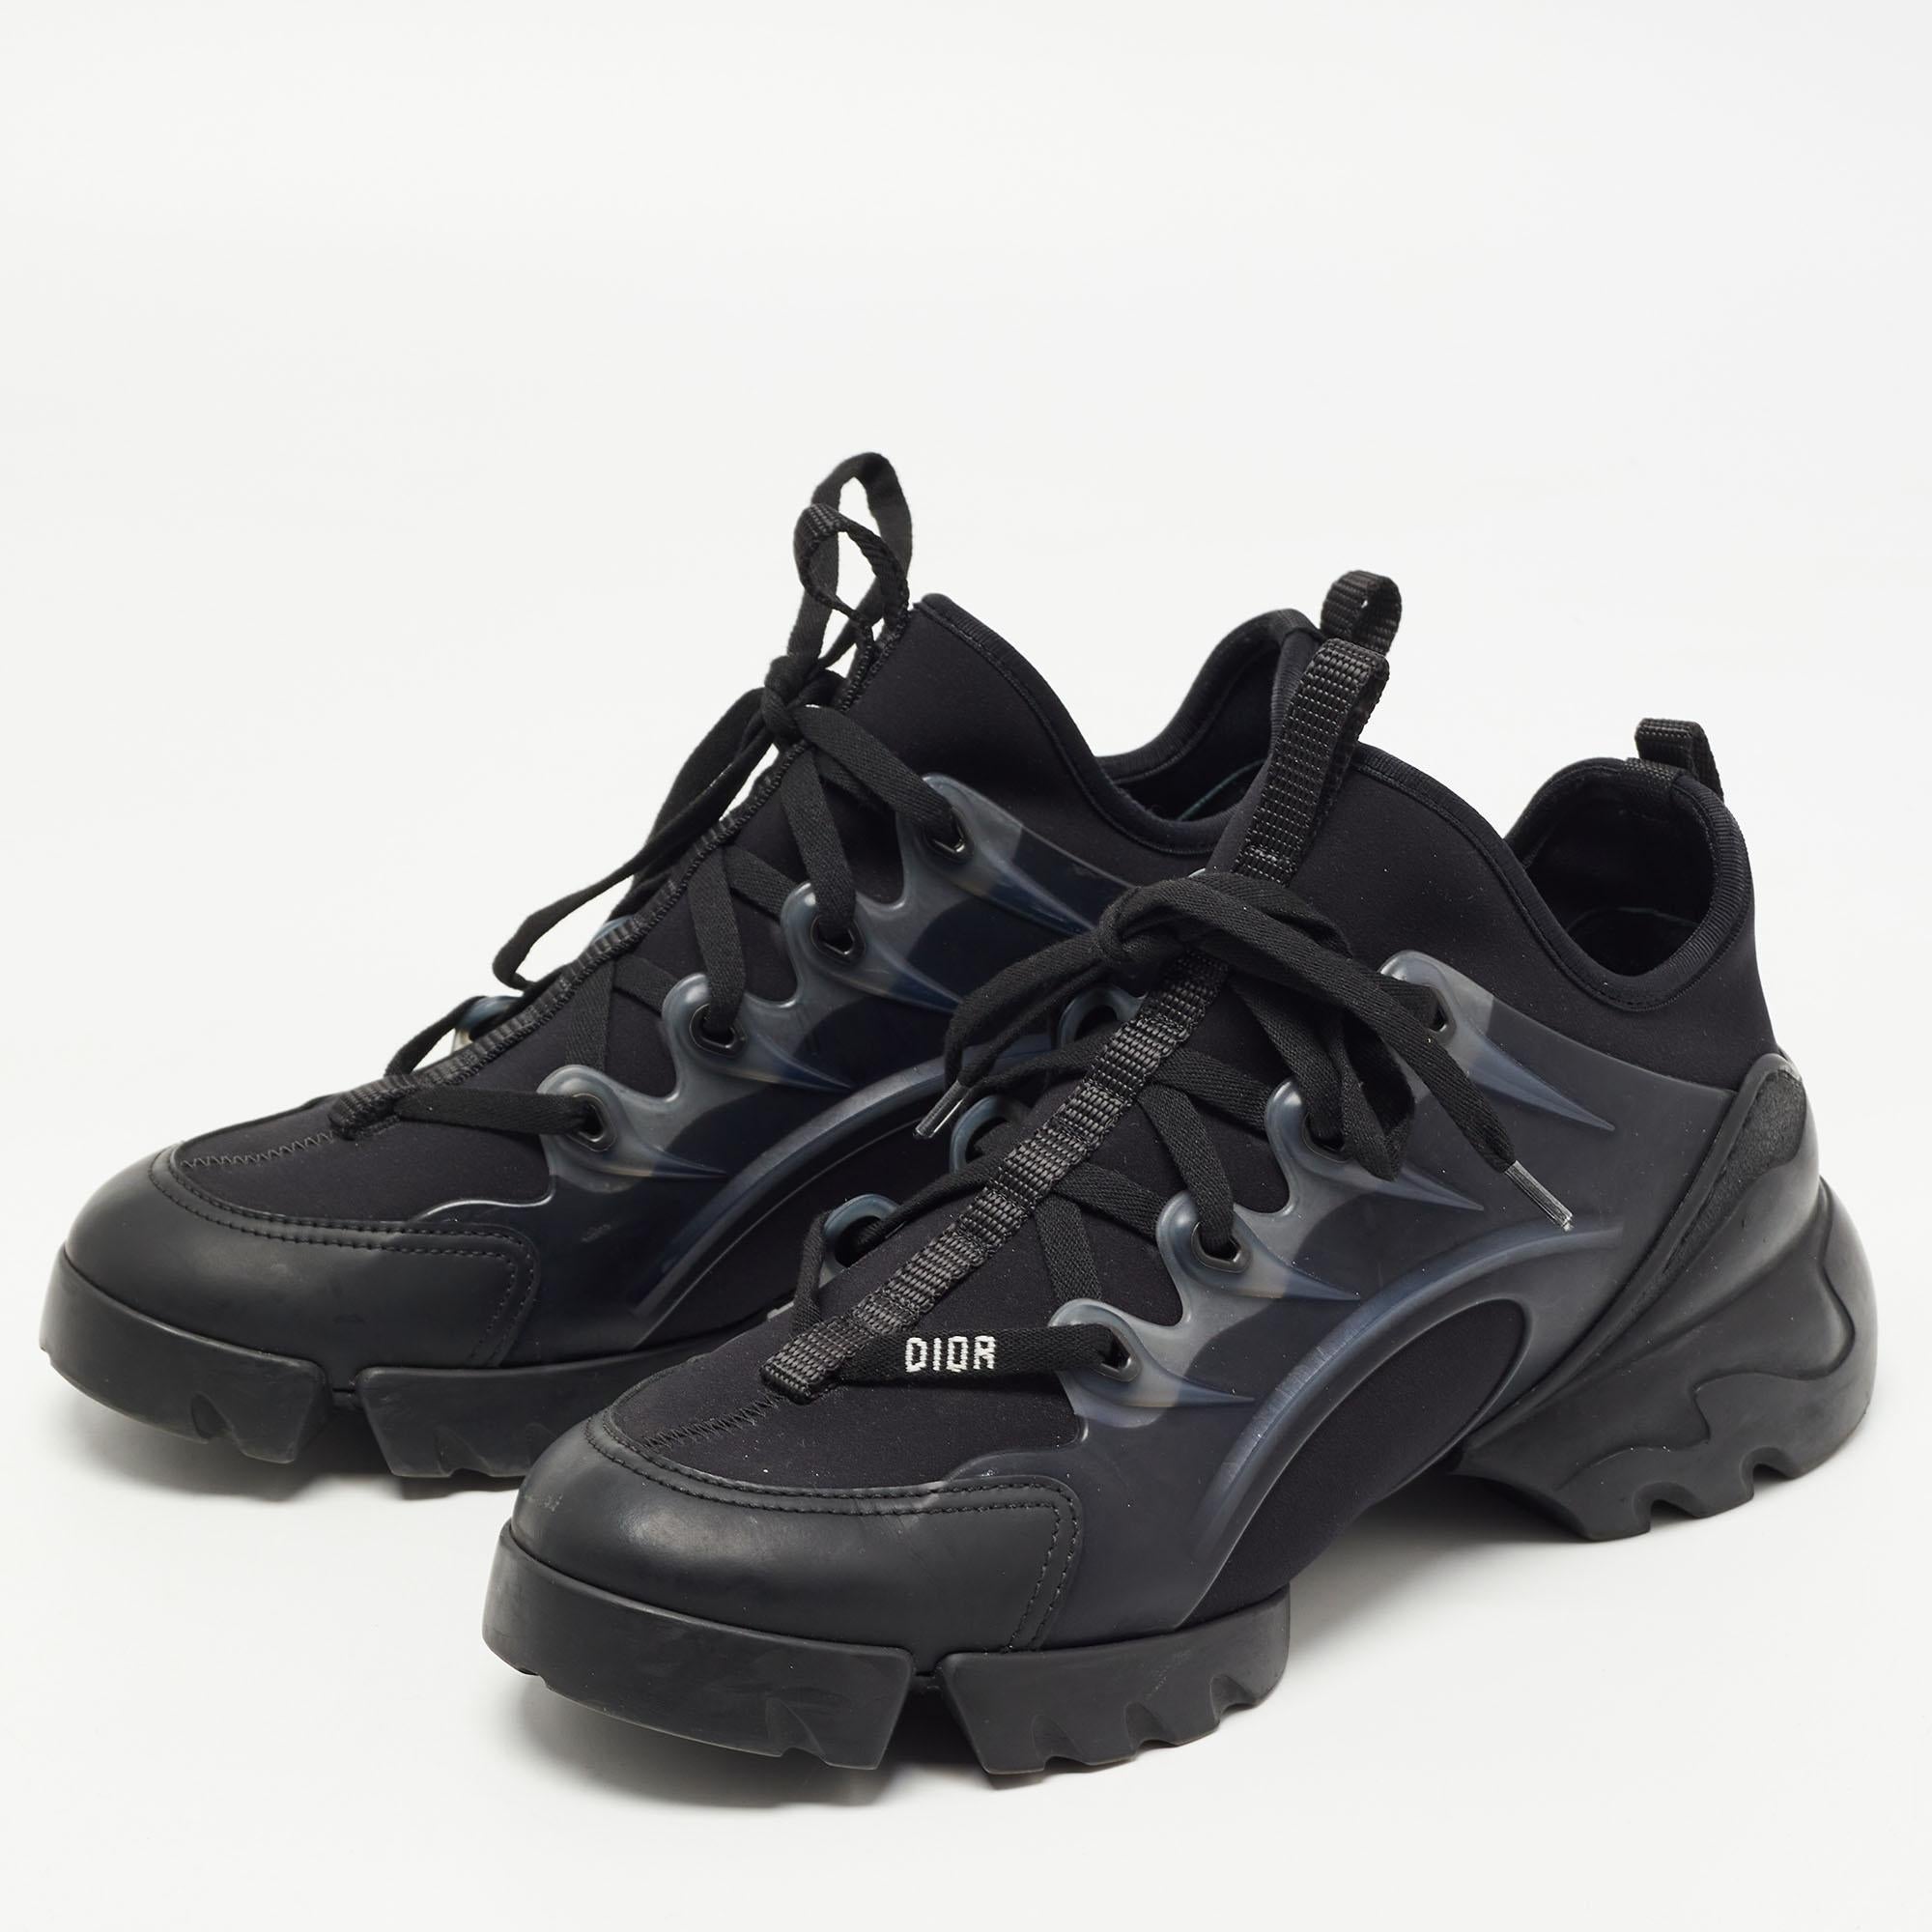 Women's Dior Black Neoprene and Leather D-Connect Sneakers Size 37.5